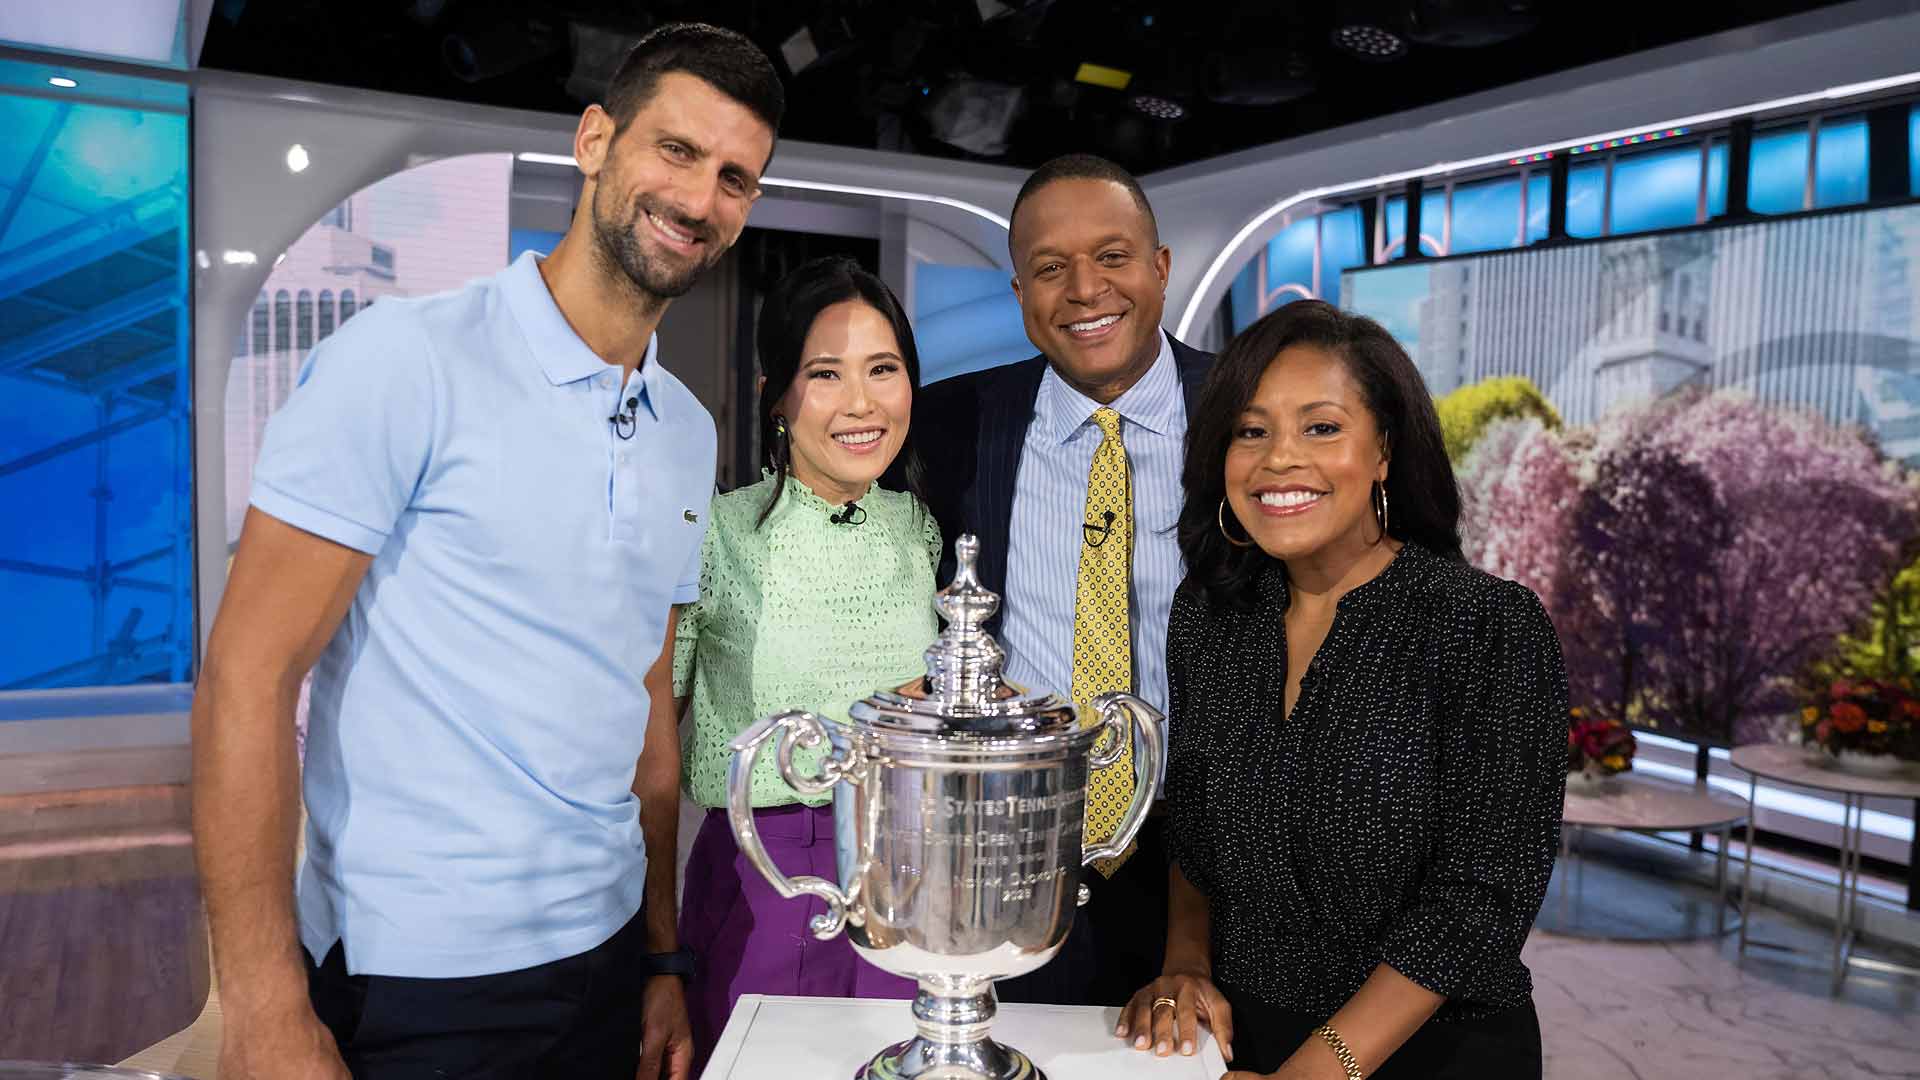 Novak Djokovic on the set of the TODAY Show in New York after winning the US Open.